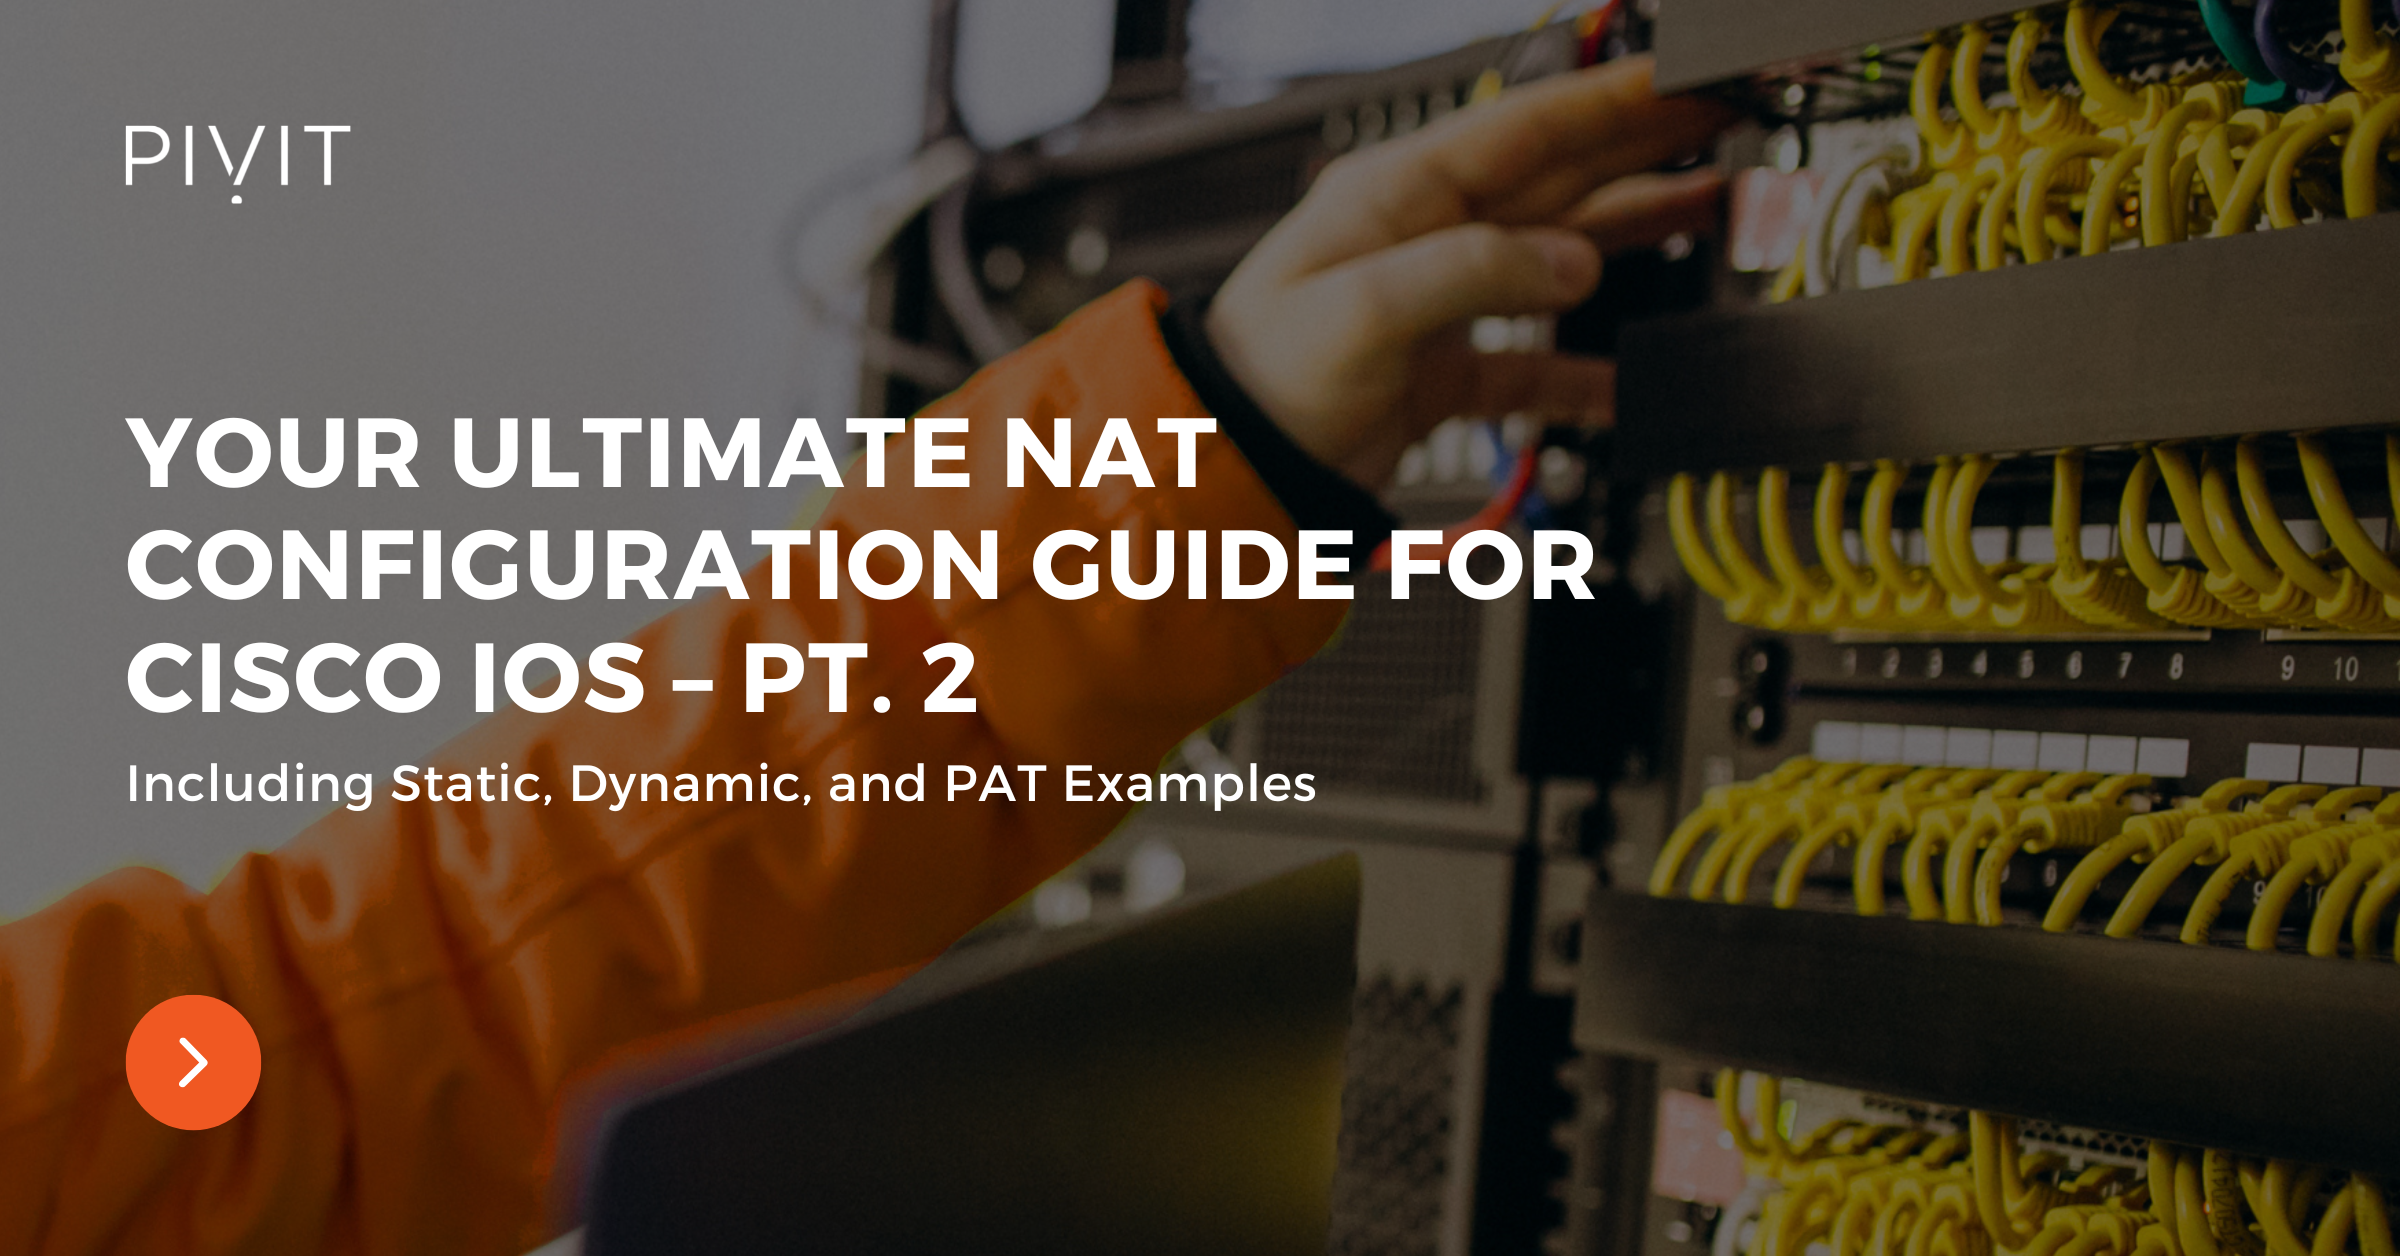 Your Ultimate NAT Configuration Guide for Cisco IOS – Pt. 2